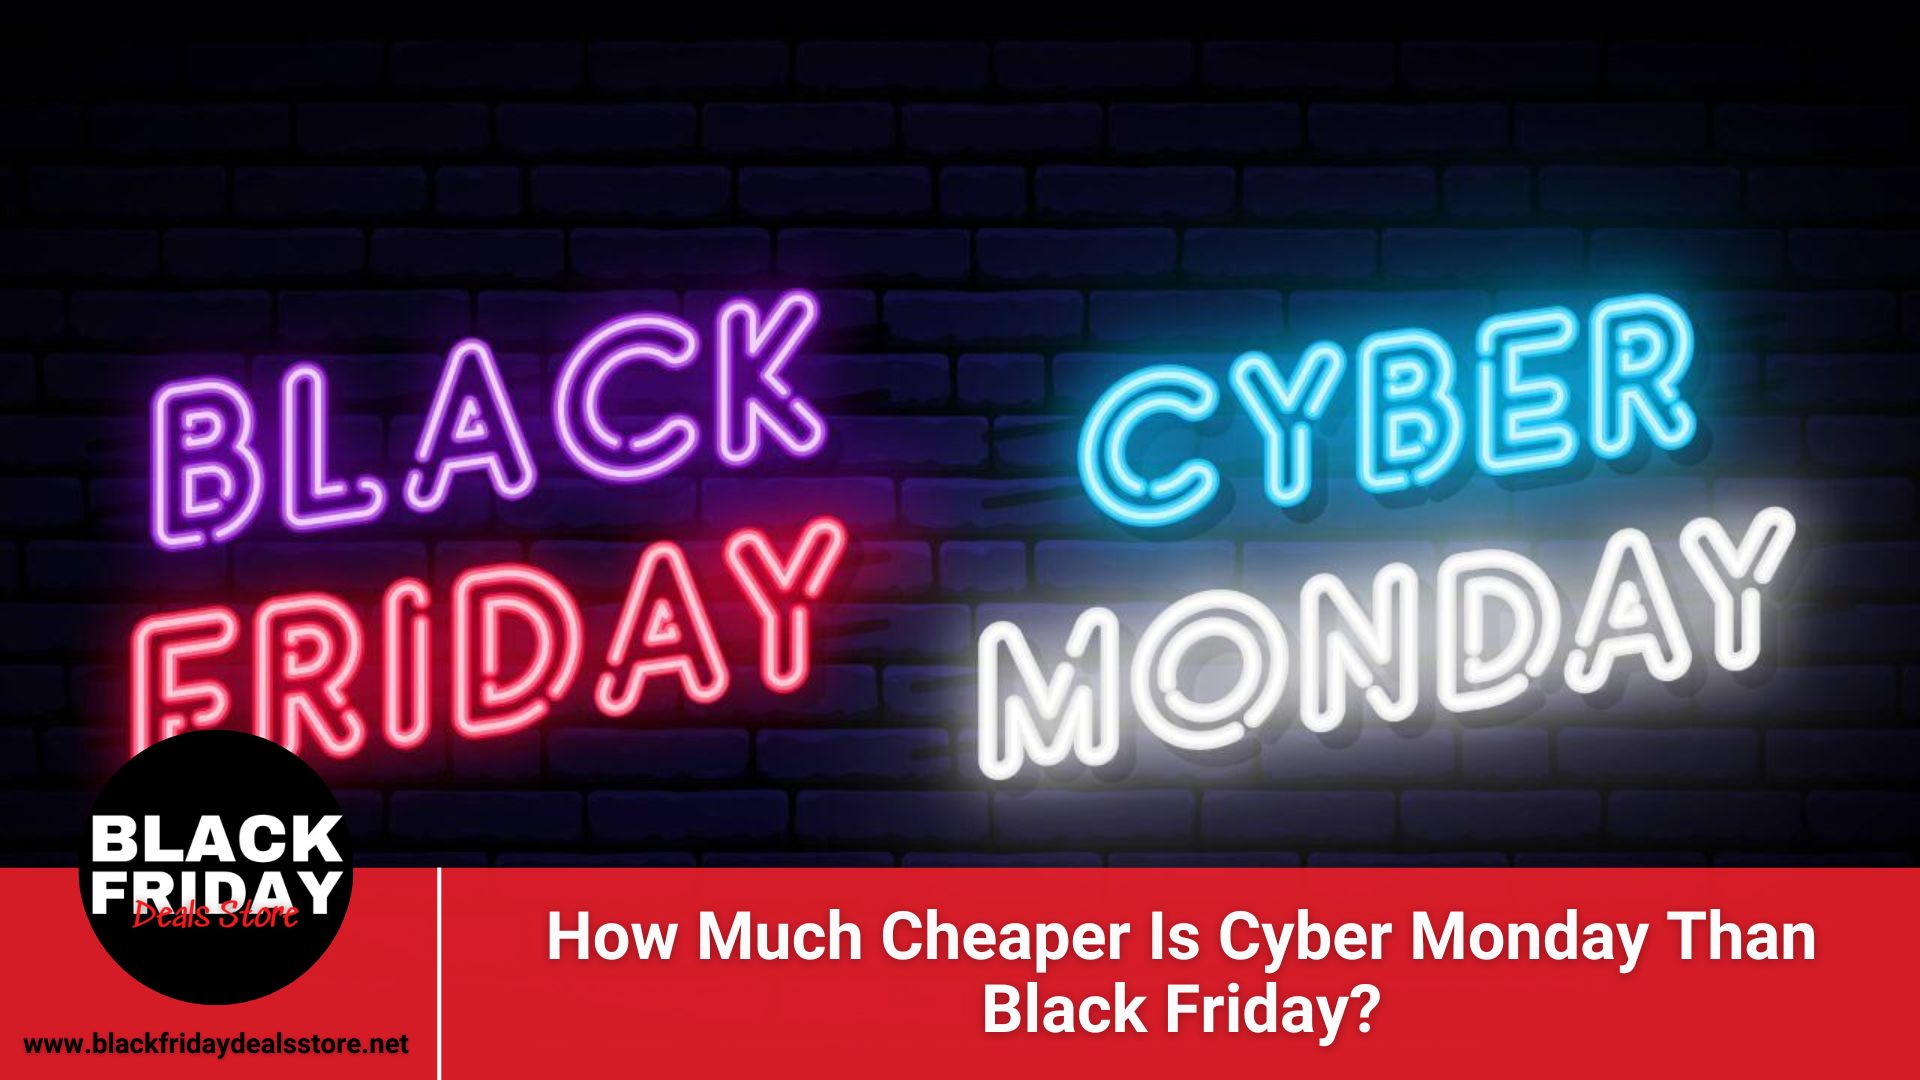 How Much Cheaper Is Cyber Monday Than Black Friday